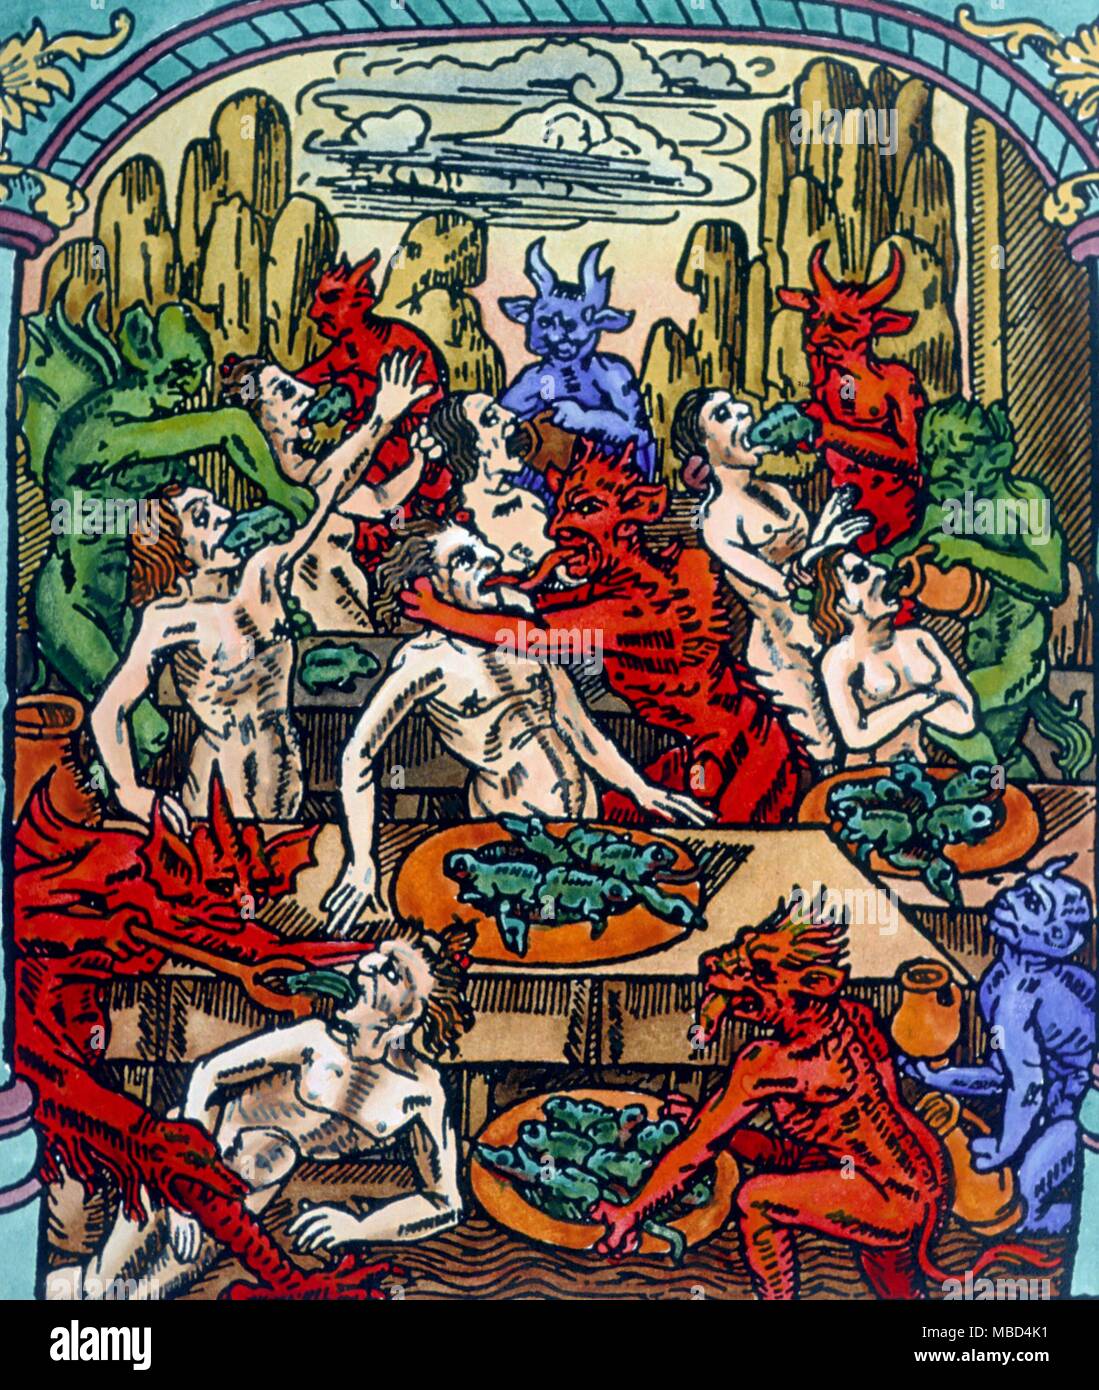 Souls tortured in hell by demons. From the 15th century Le Grant Kalendrier & Compost des Bergiers, avecq leur Astrologie, printed by Nicolas le Rouge of Troyes.- Stock Photo